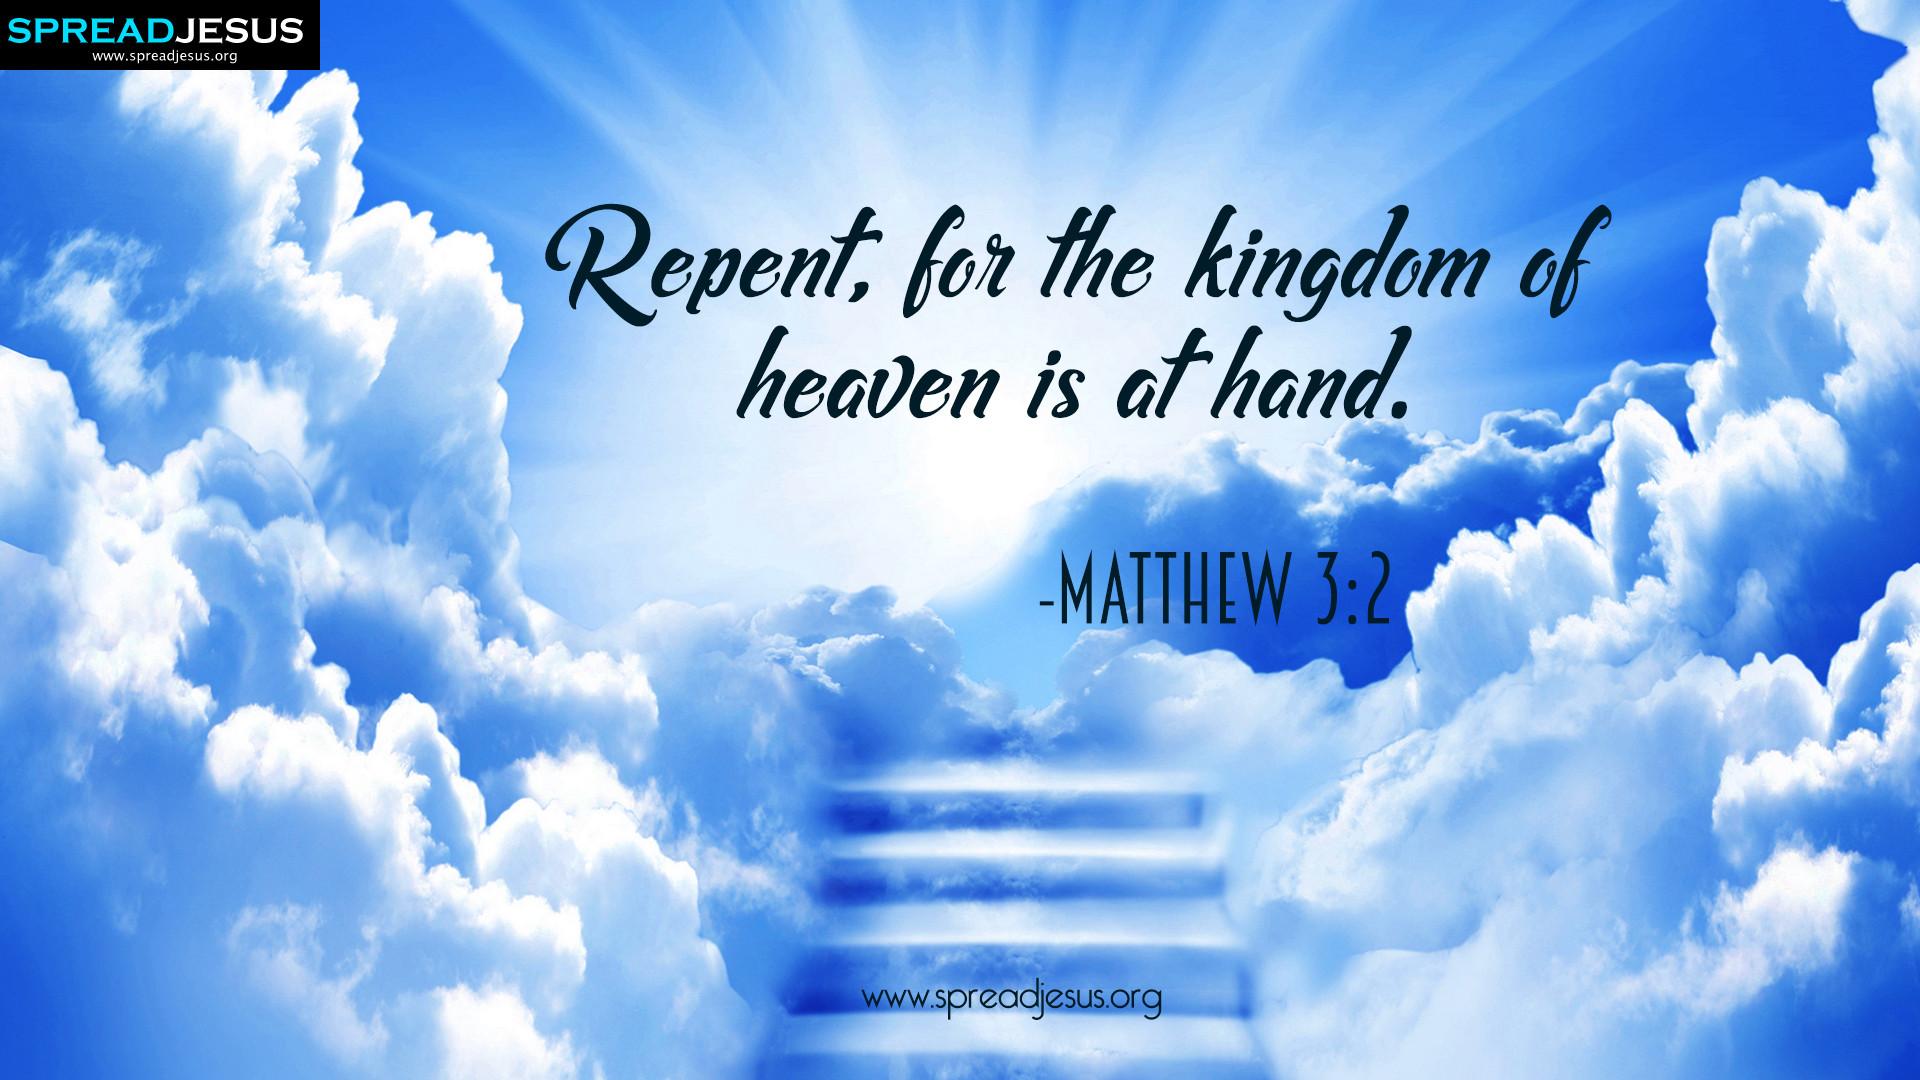 Bible Quotes HD Wallpaper Matthew 3:2 Download Repent, For The Kingdom Of Heaven